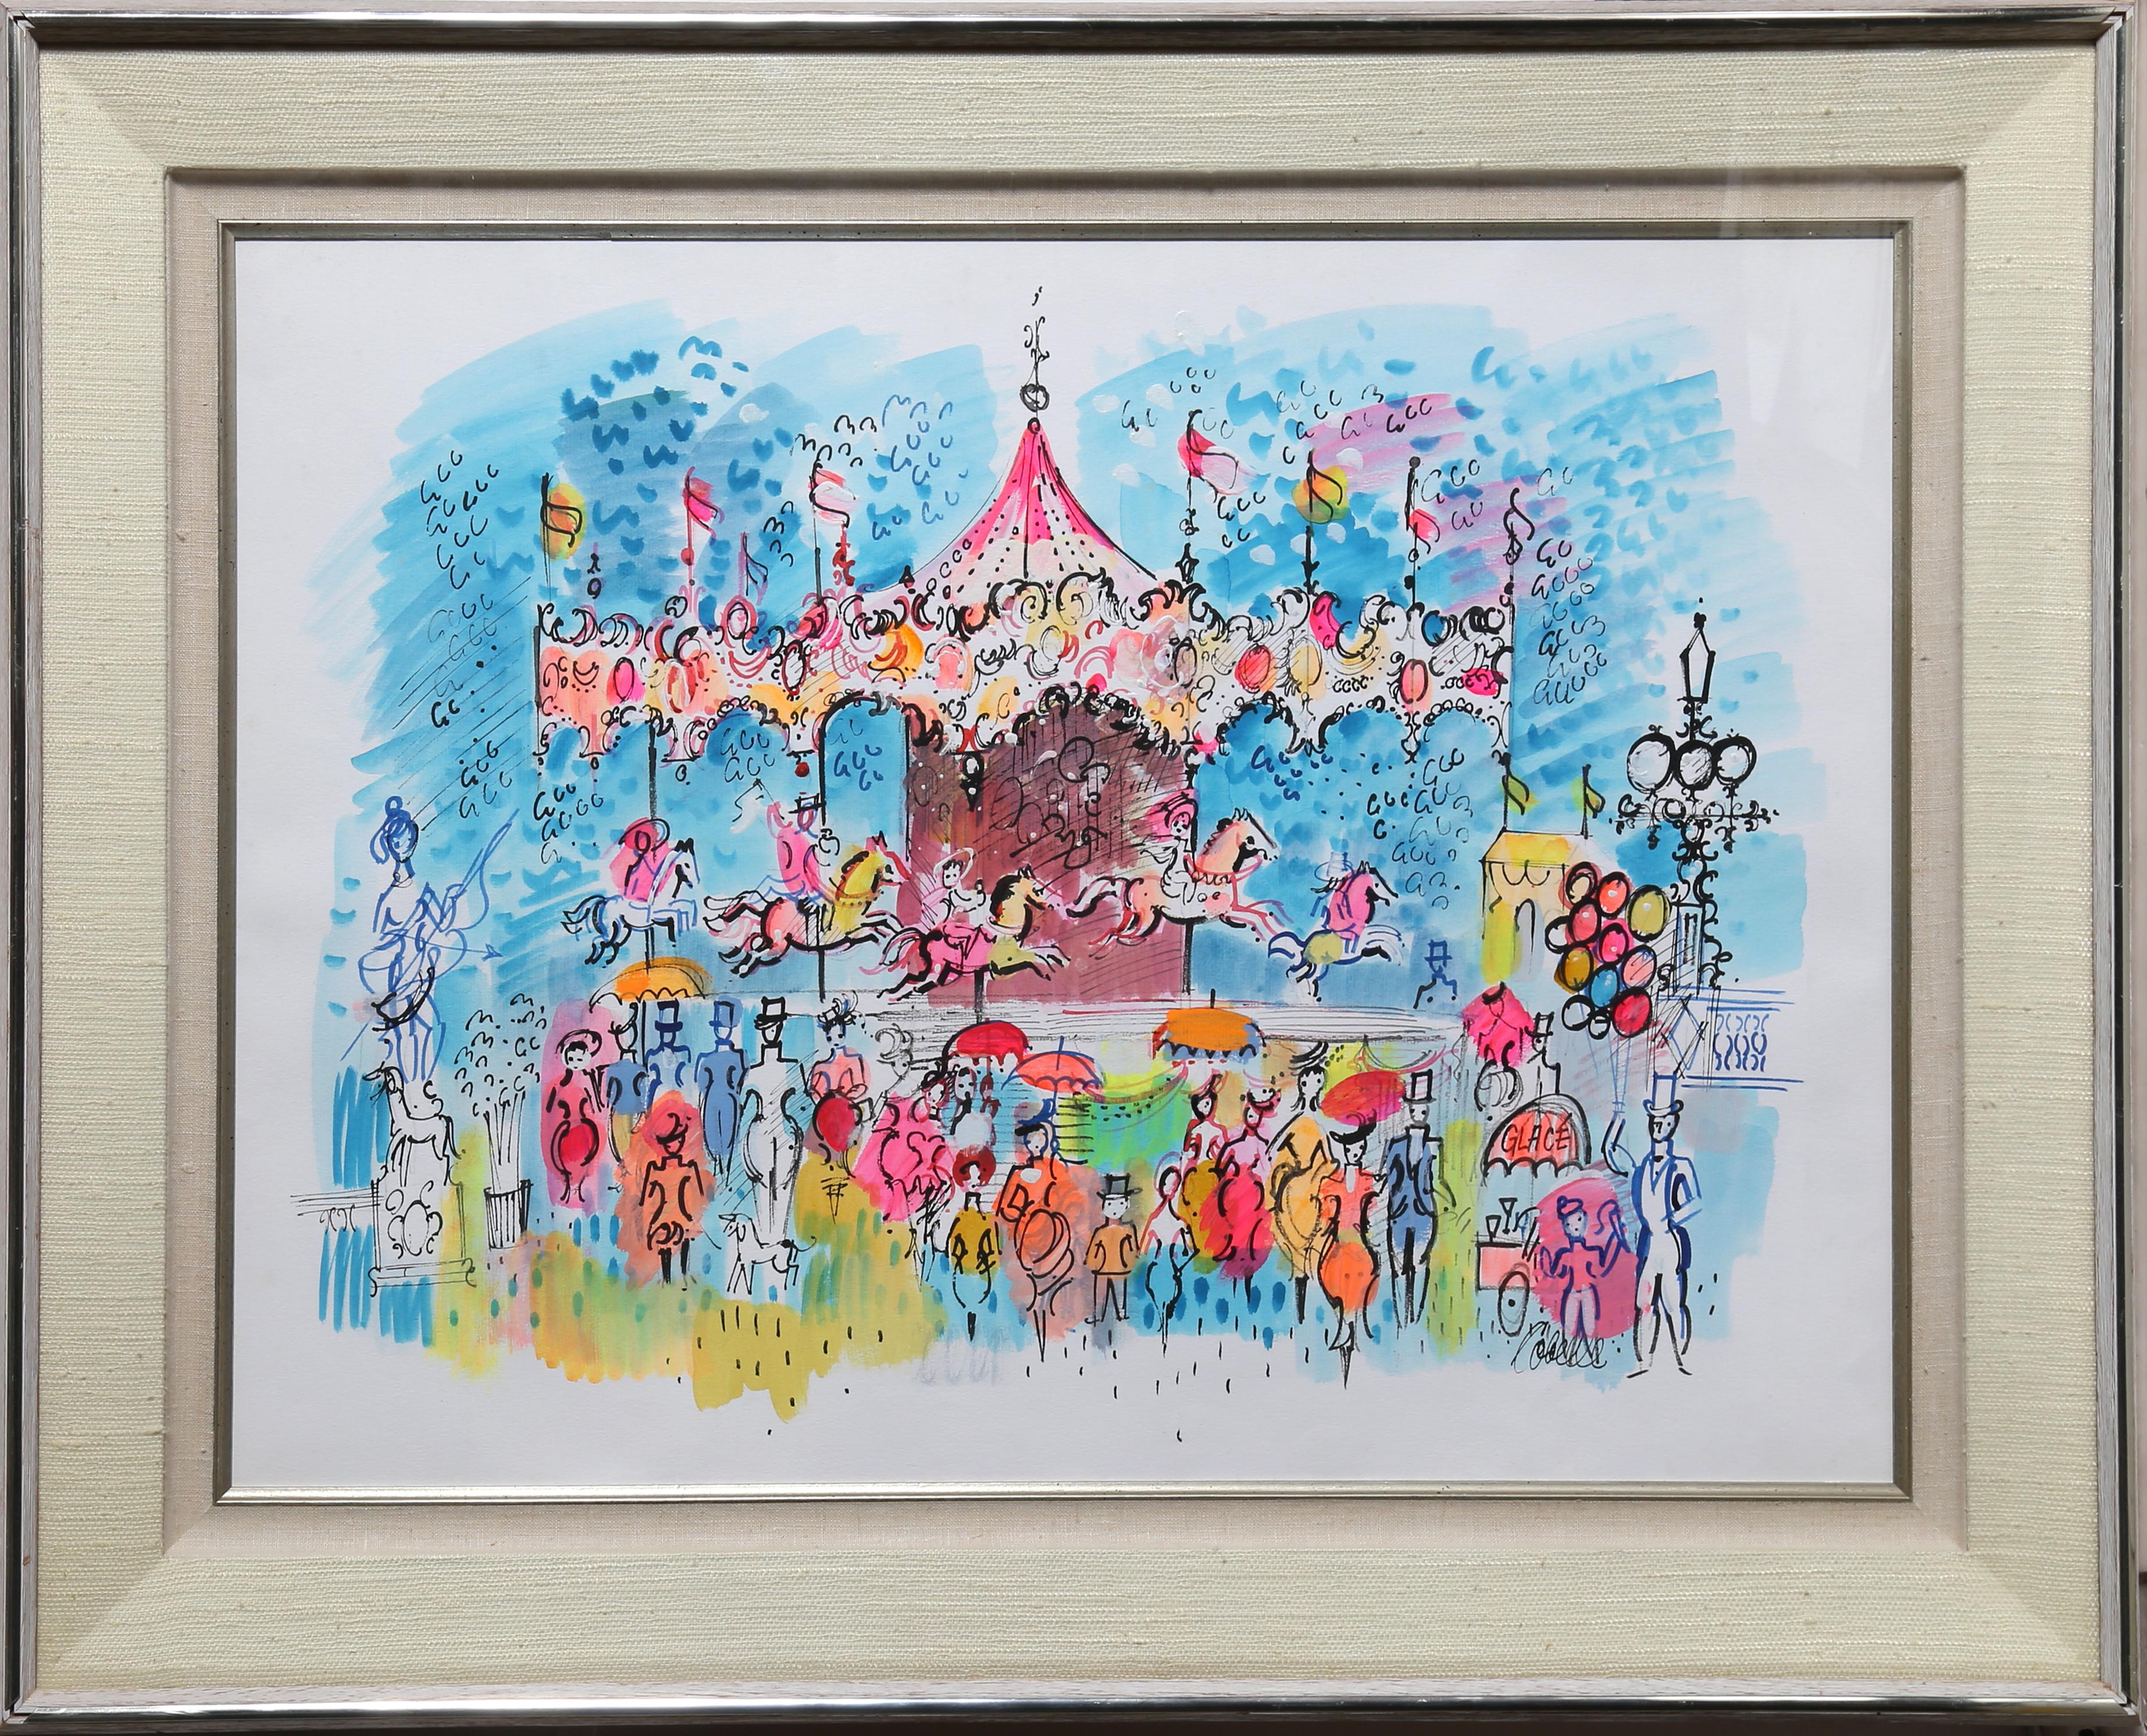 A vibrant painting of a carousel in a crowded Paris plaza by French artist Charles Cobelle. His style regularly uses bright neon colors to depict everyday street life scenes of 1960s France. This piece is signed and nicely framed.

Carousel
Charles